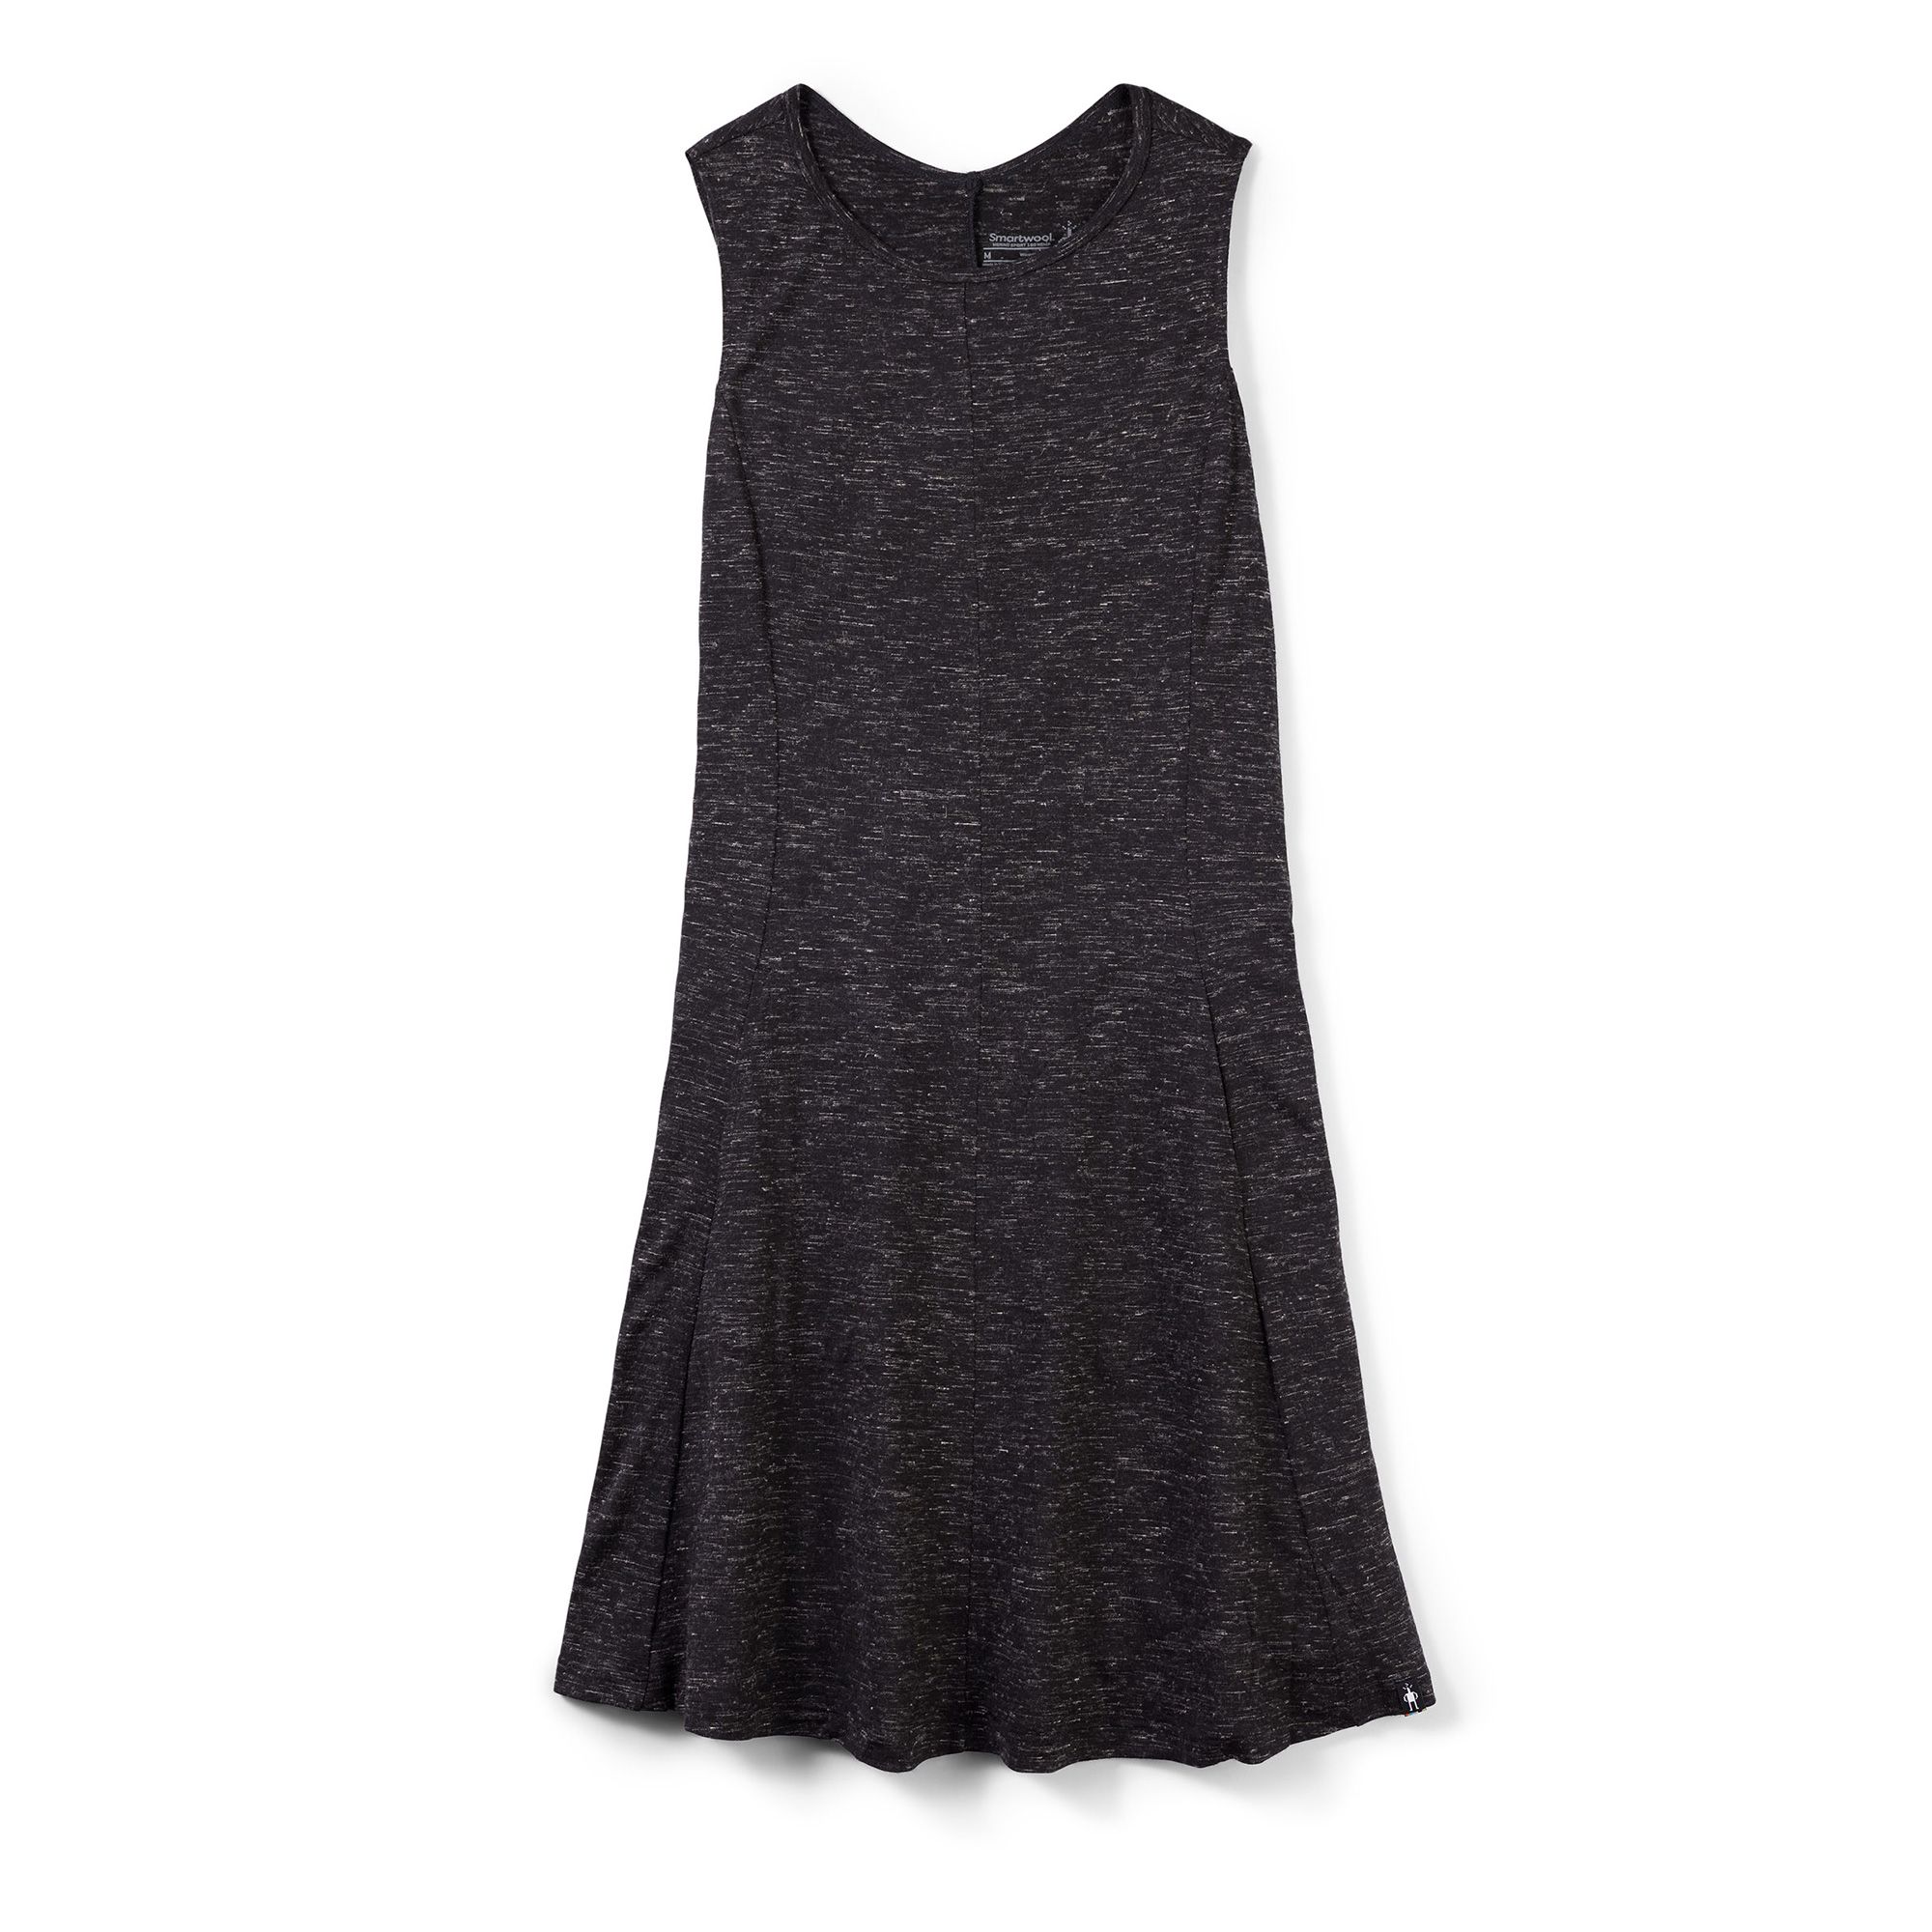 Shandra Relaxed Fit Tank Top, Ethically Made in Canada